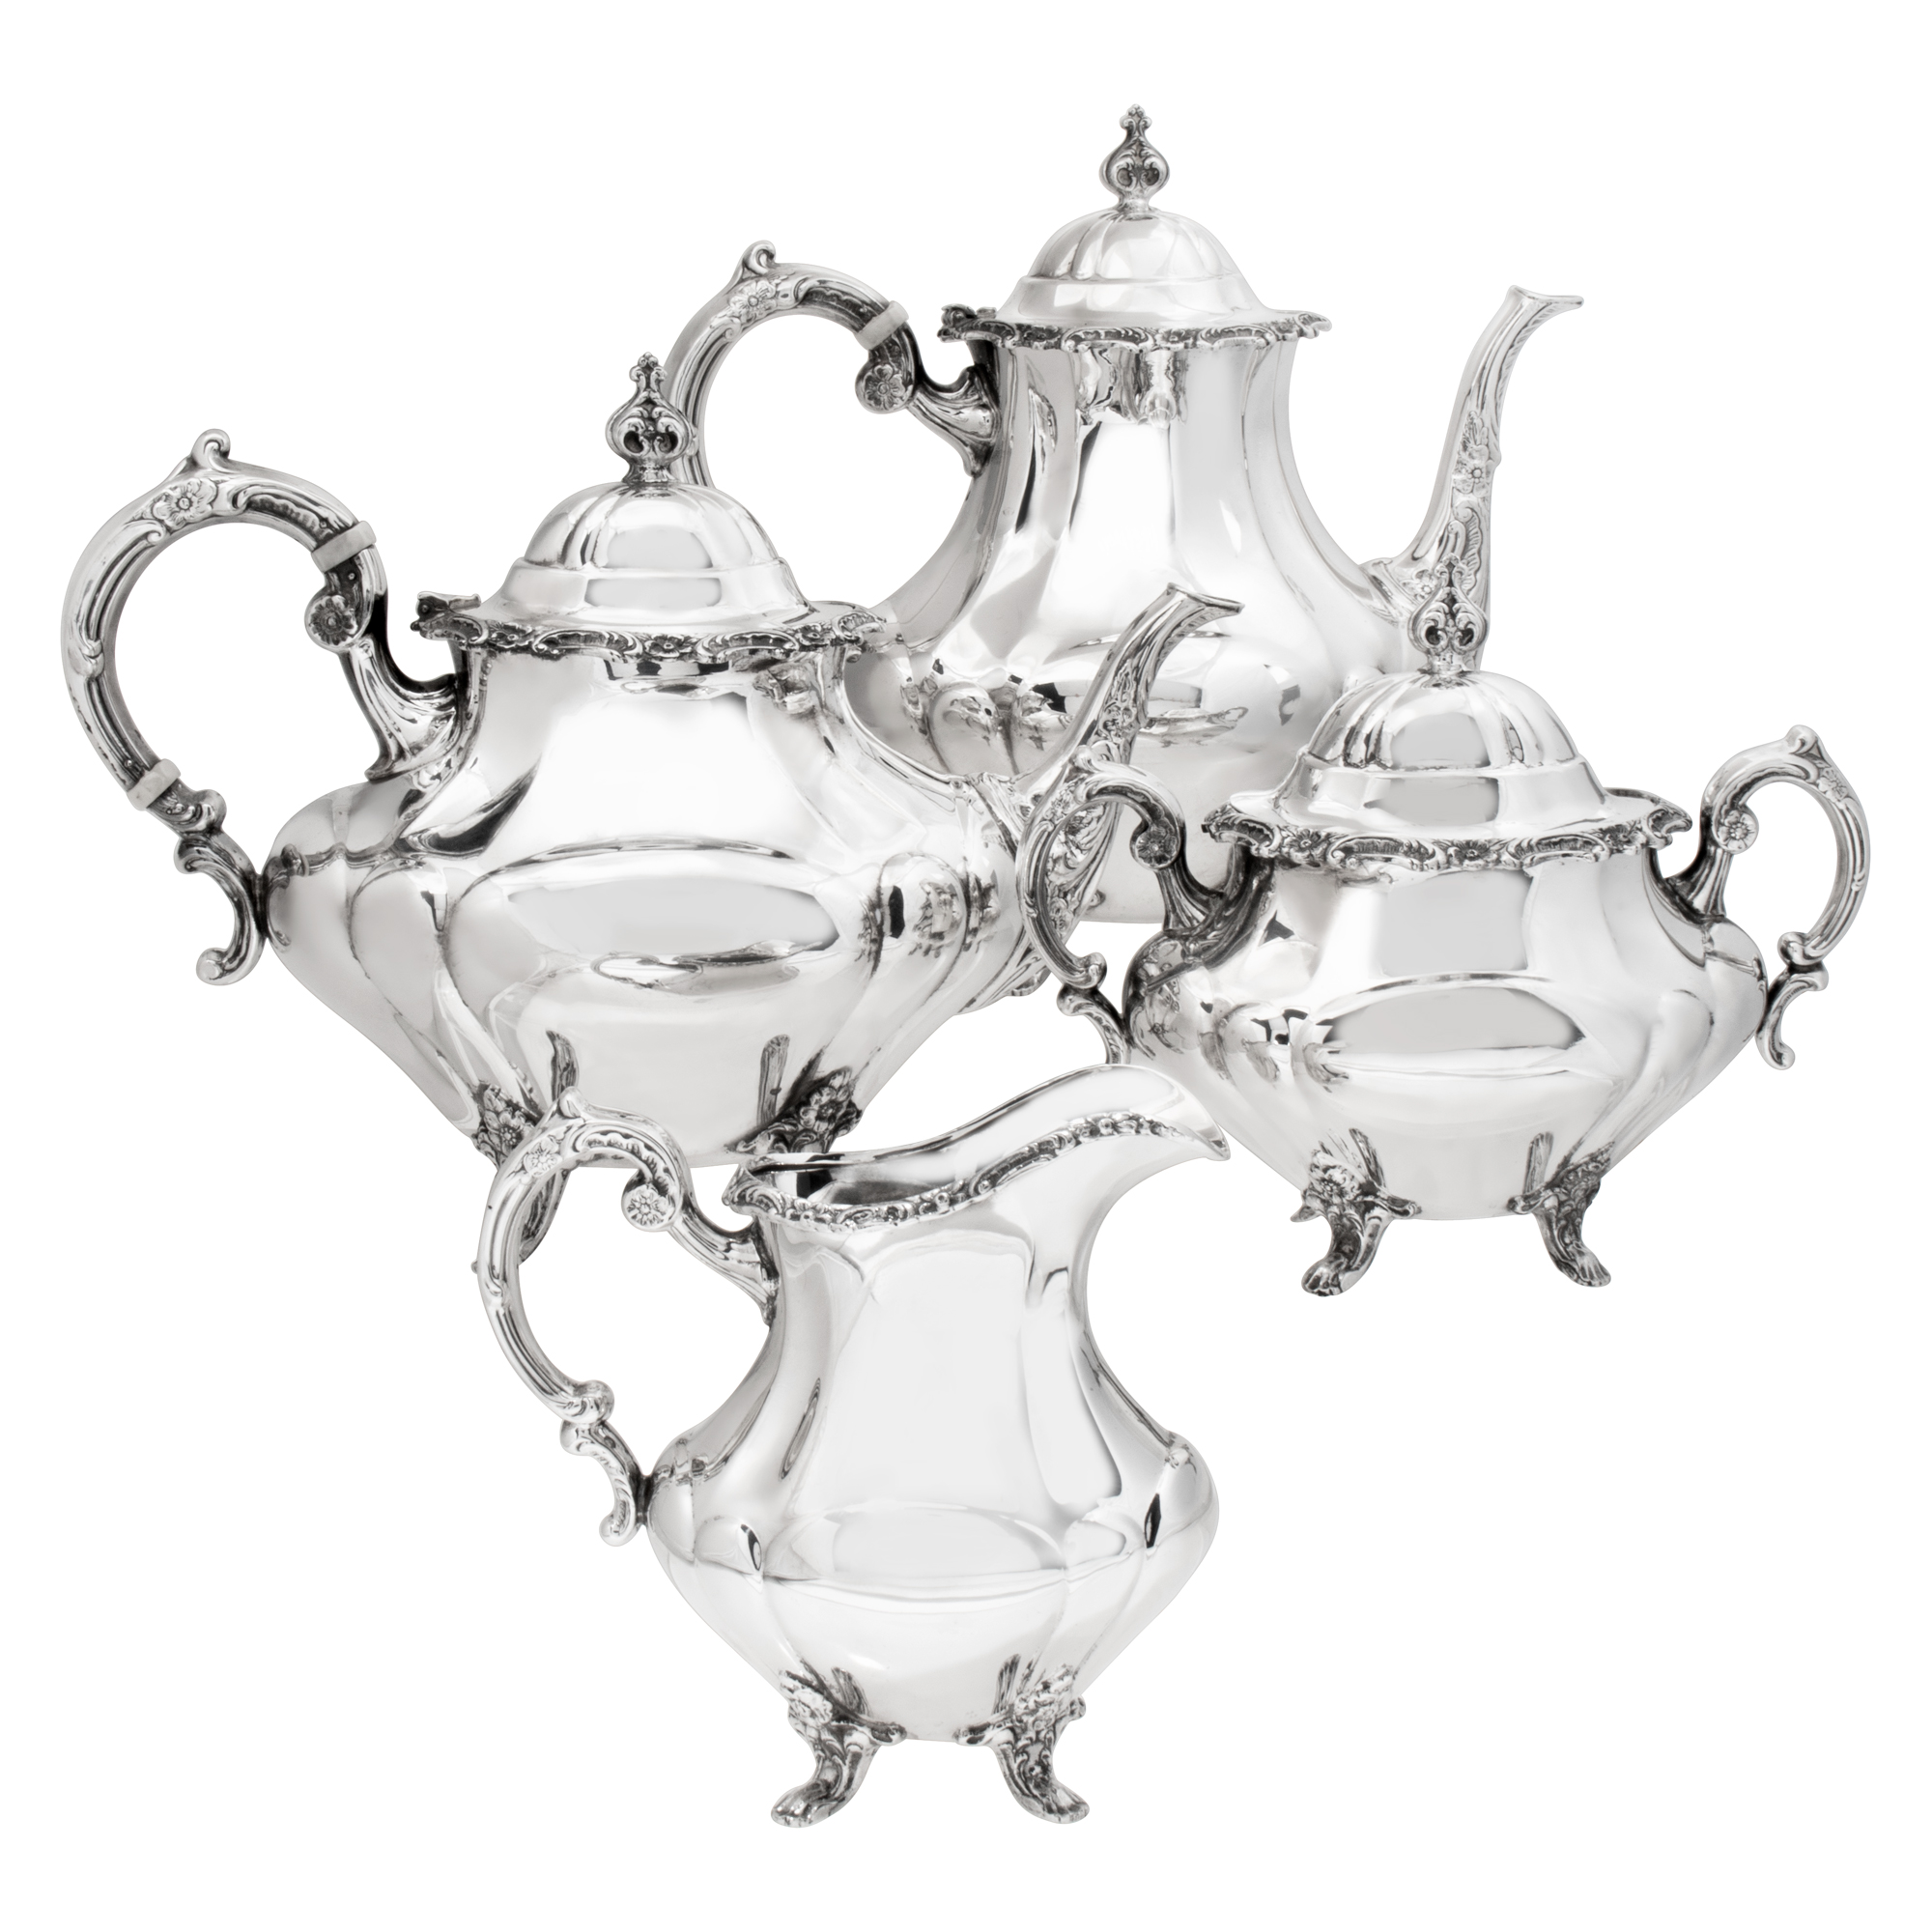 GEORGIAN ROSE 4 pieces sterling silver tea/coffee set. Patented in 1941 by the Reed & Barton Sterling Silver company. 2295 grams (74 ounces troy) sterling silver. image 1